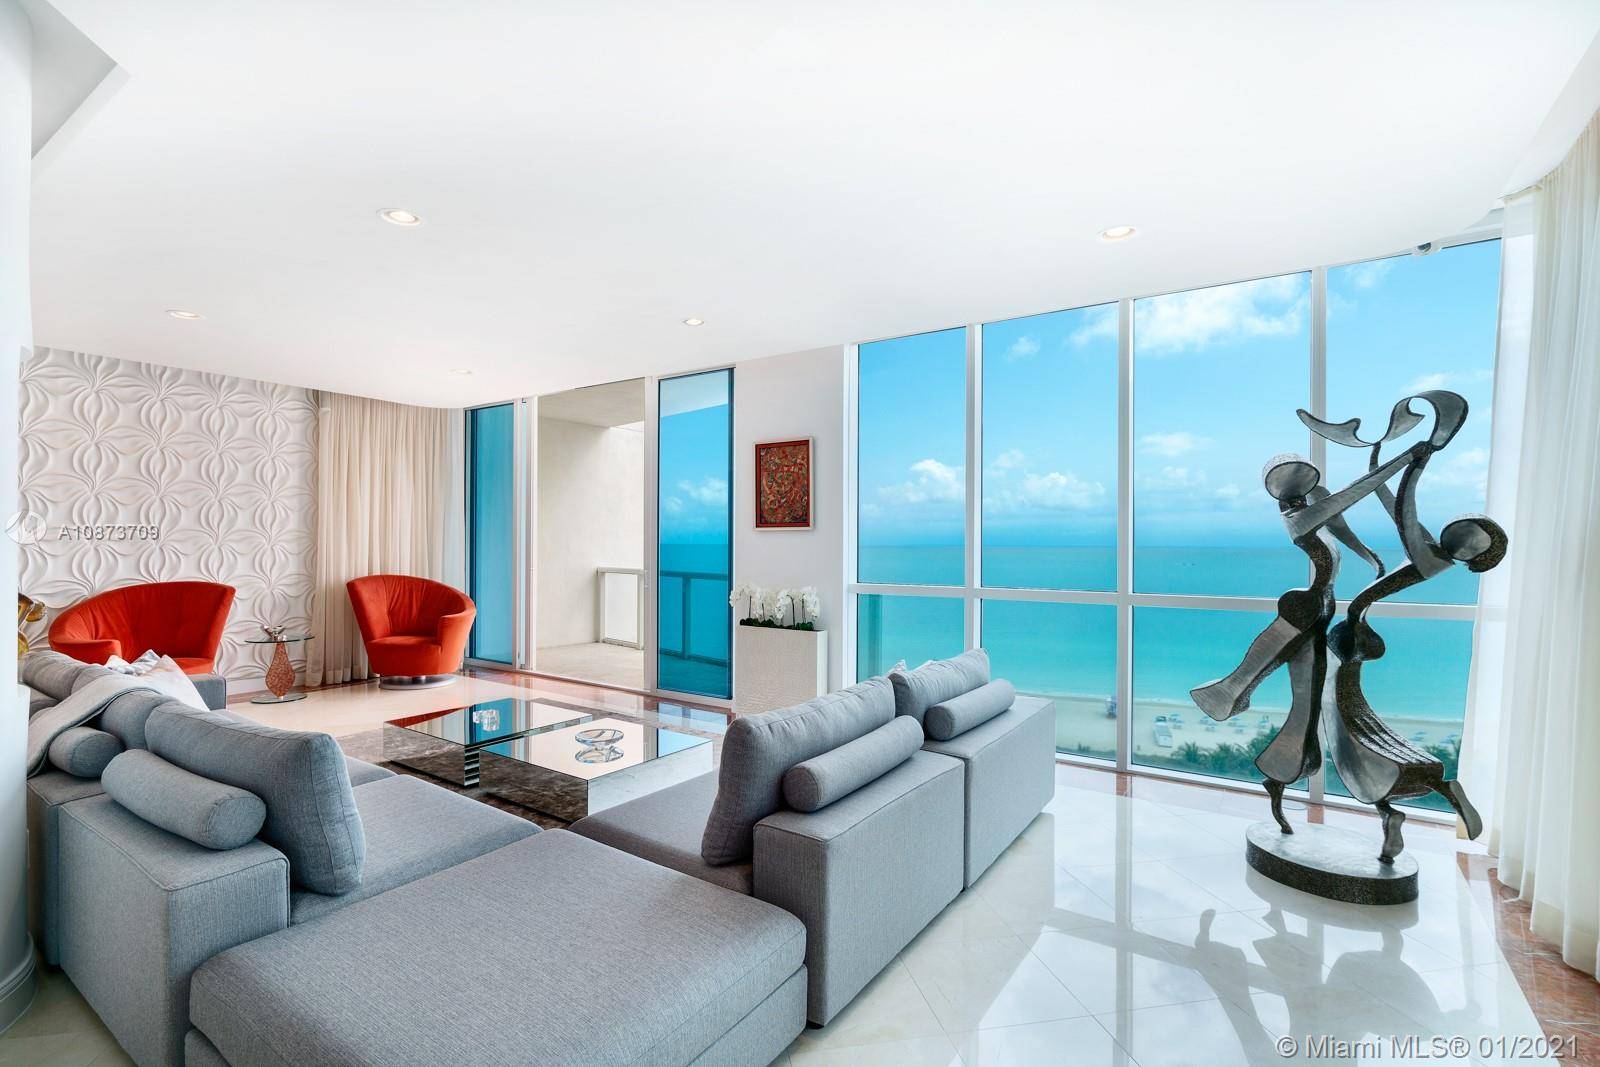 Spacious 3404 sf condo with direct ocean views for lease at Continuum North.